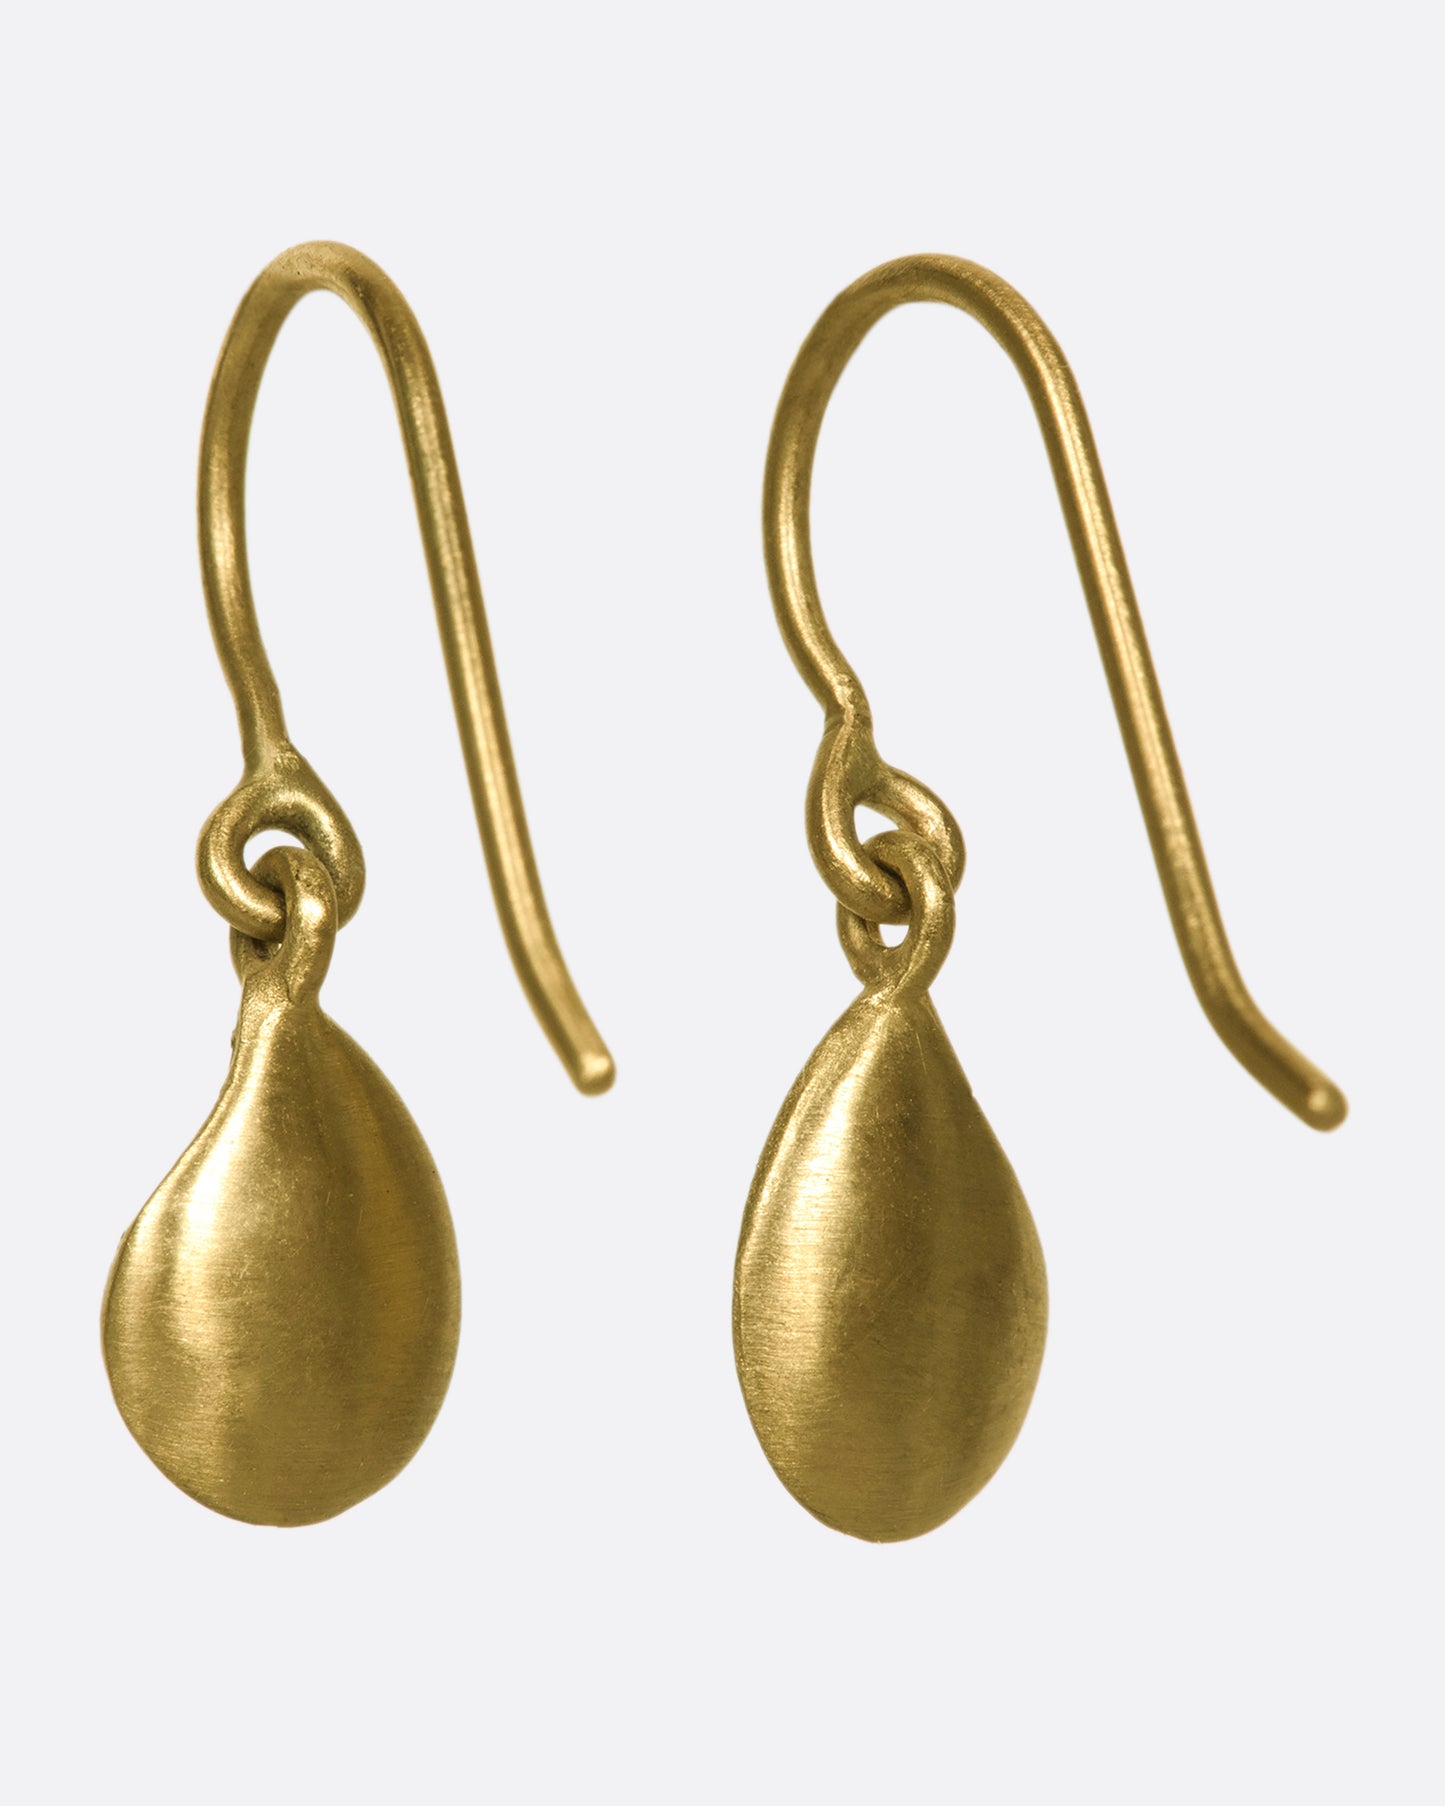 A beautiful pair of 10k gold droplet dangle earrings, etched away to reveal three glittery diamonds.